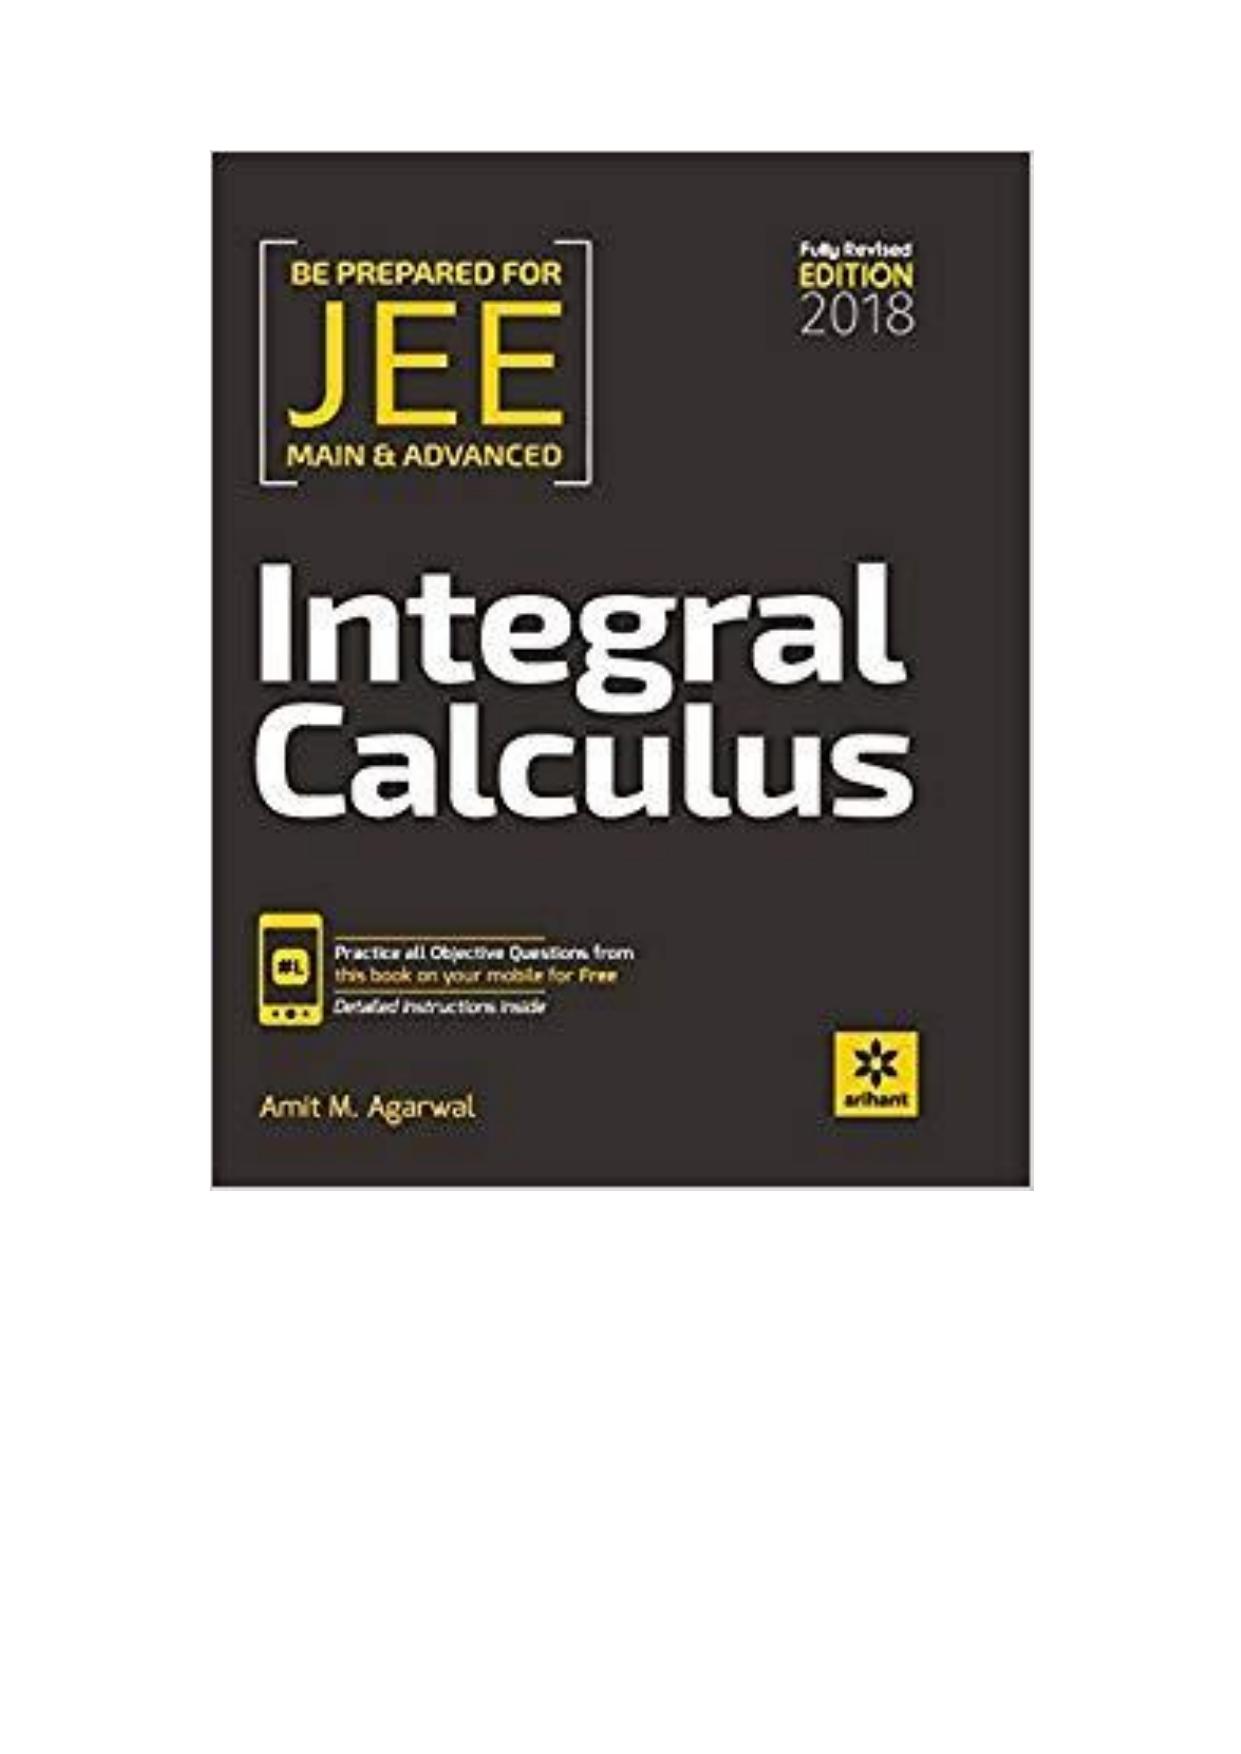 Amit M Agarwal Integral Calculus IIT JEE Main Advanced Fully Revised Edition for IITJEE Arihant Meerut ( PDFDrive ) 2018